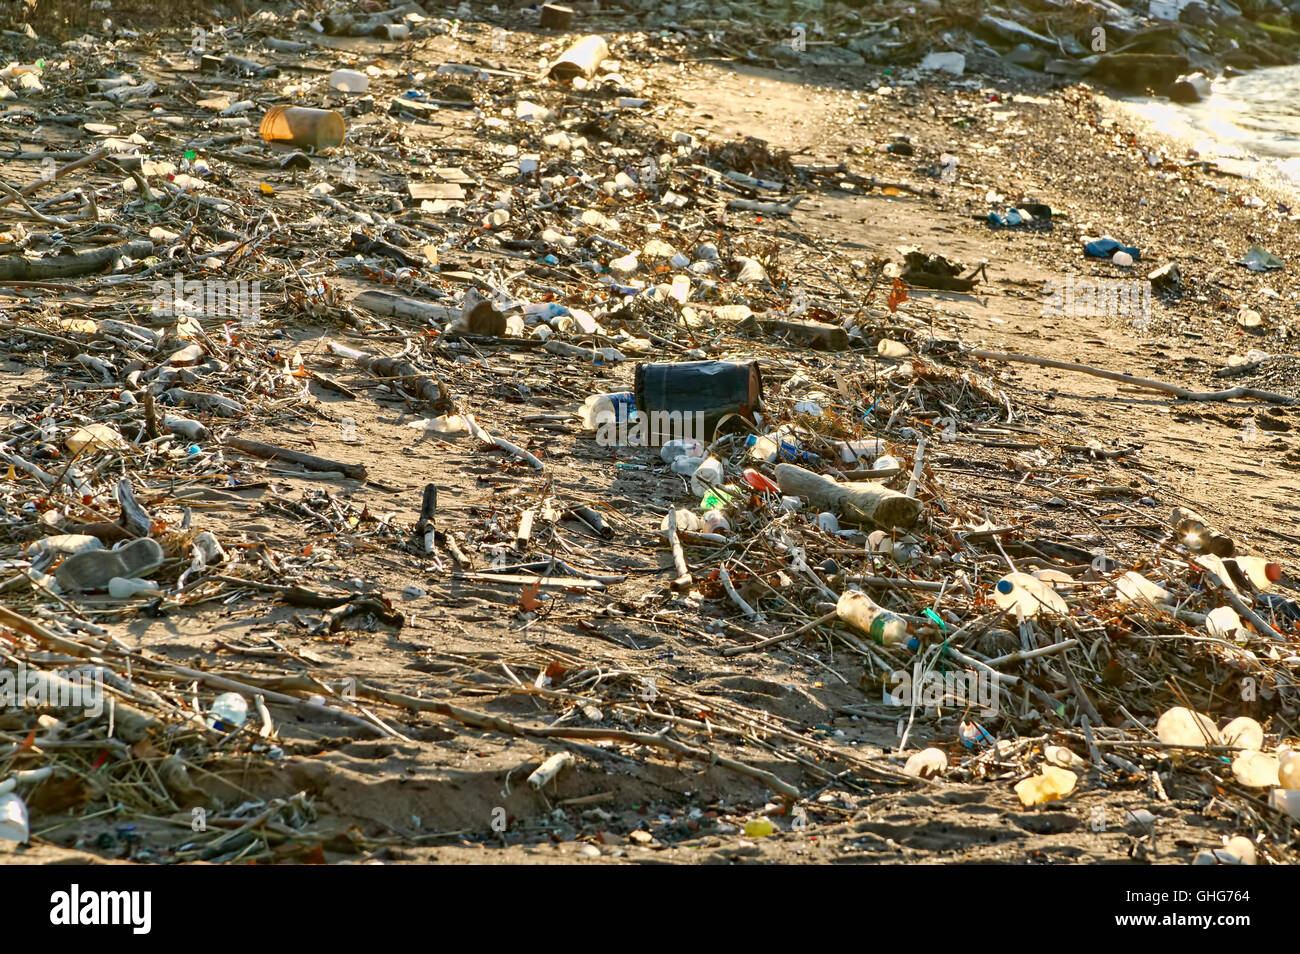 View of garbage mostly plastic bottles on a waterway in the industrial area of New Jersey Stock Photo